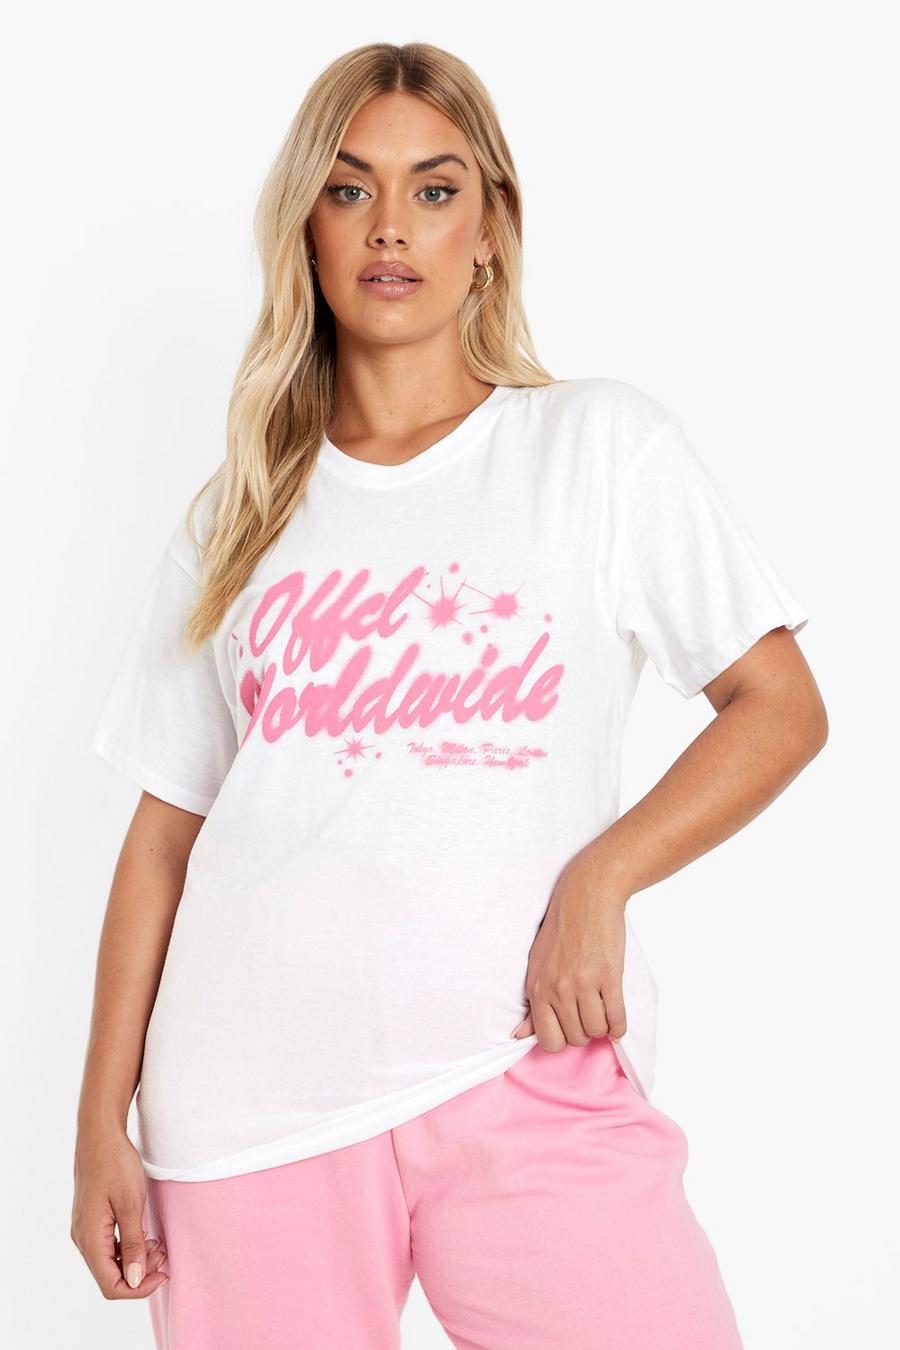 T-shirt Plus Size Official graffiti, White image number 1